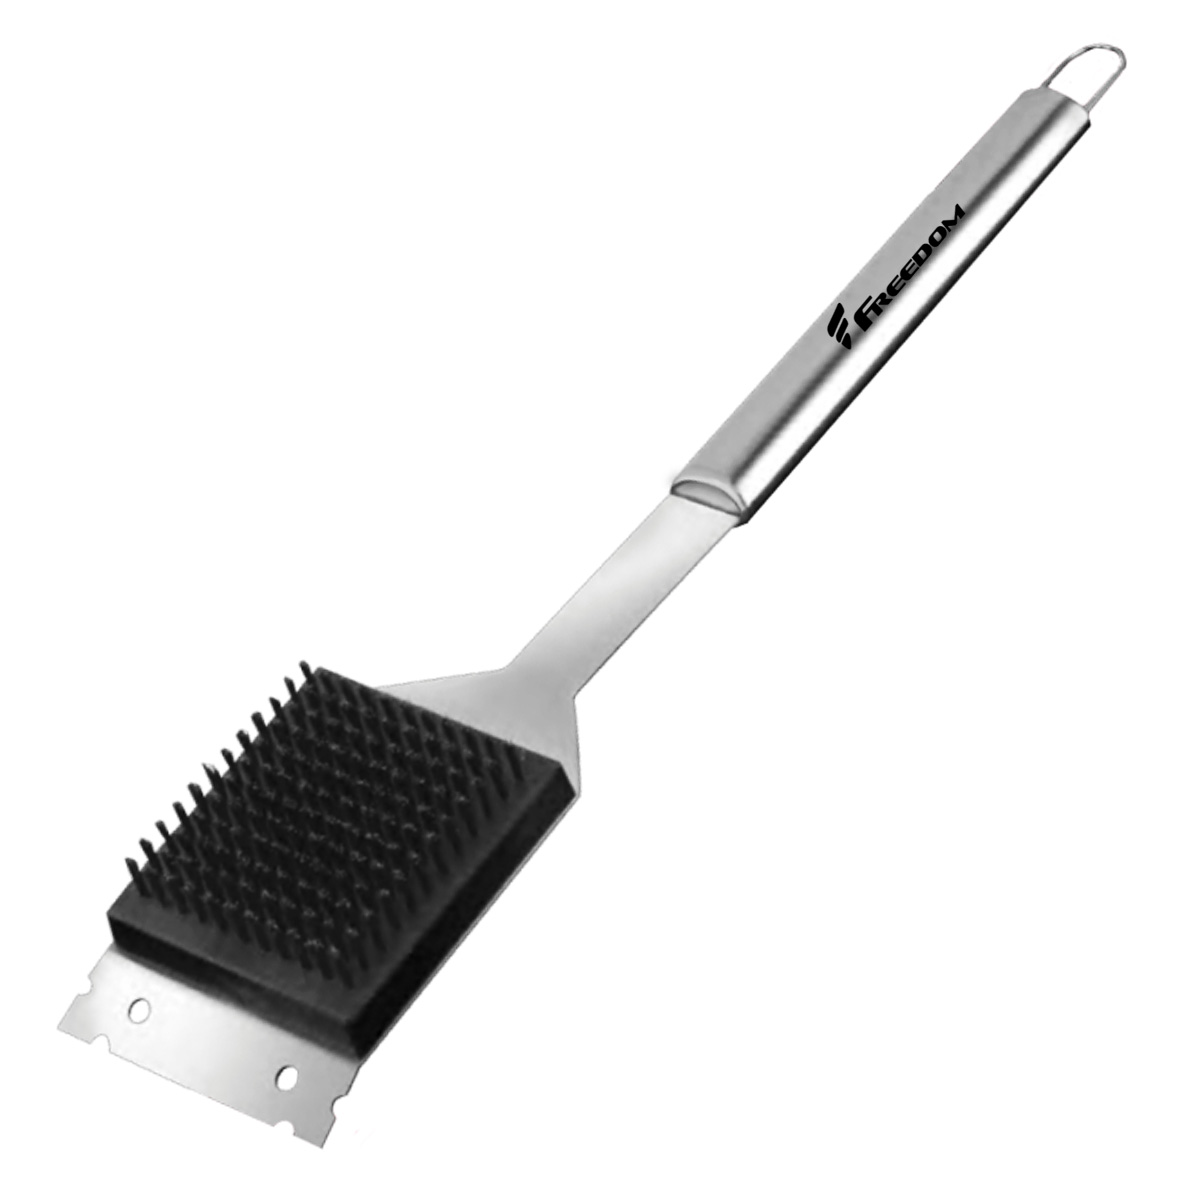 OVERSIZED STAINLESS STEEL BARBEQUE GRILL BRUSH